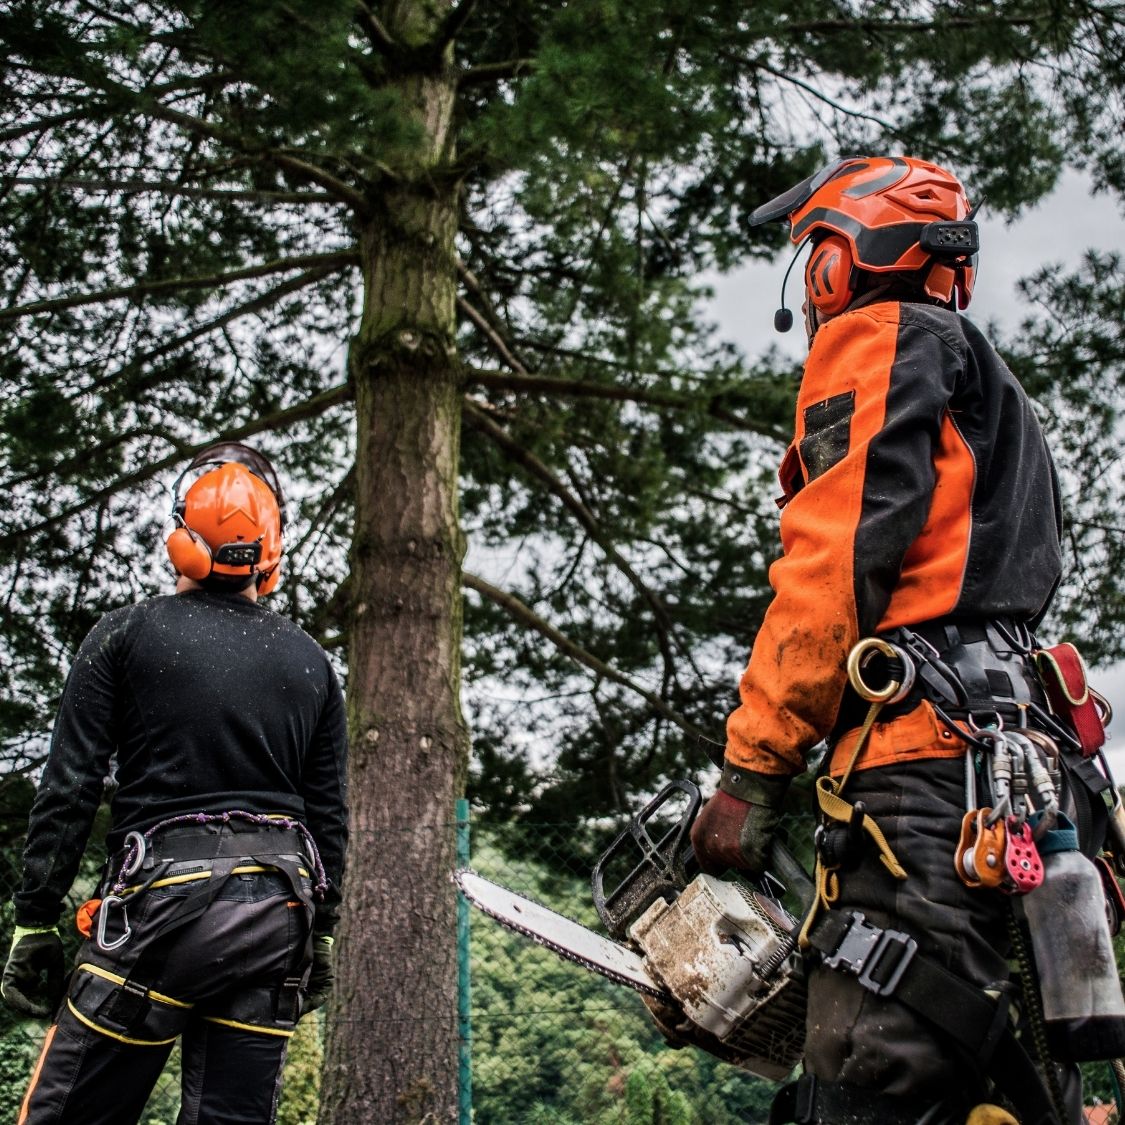 The Best Ways To Stay Safe as an Arborist